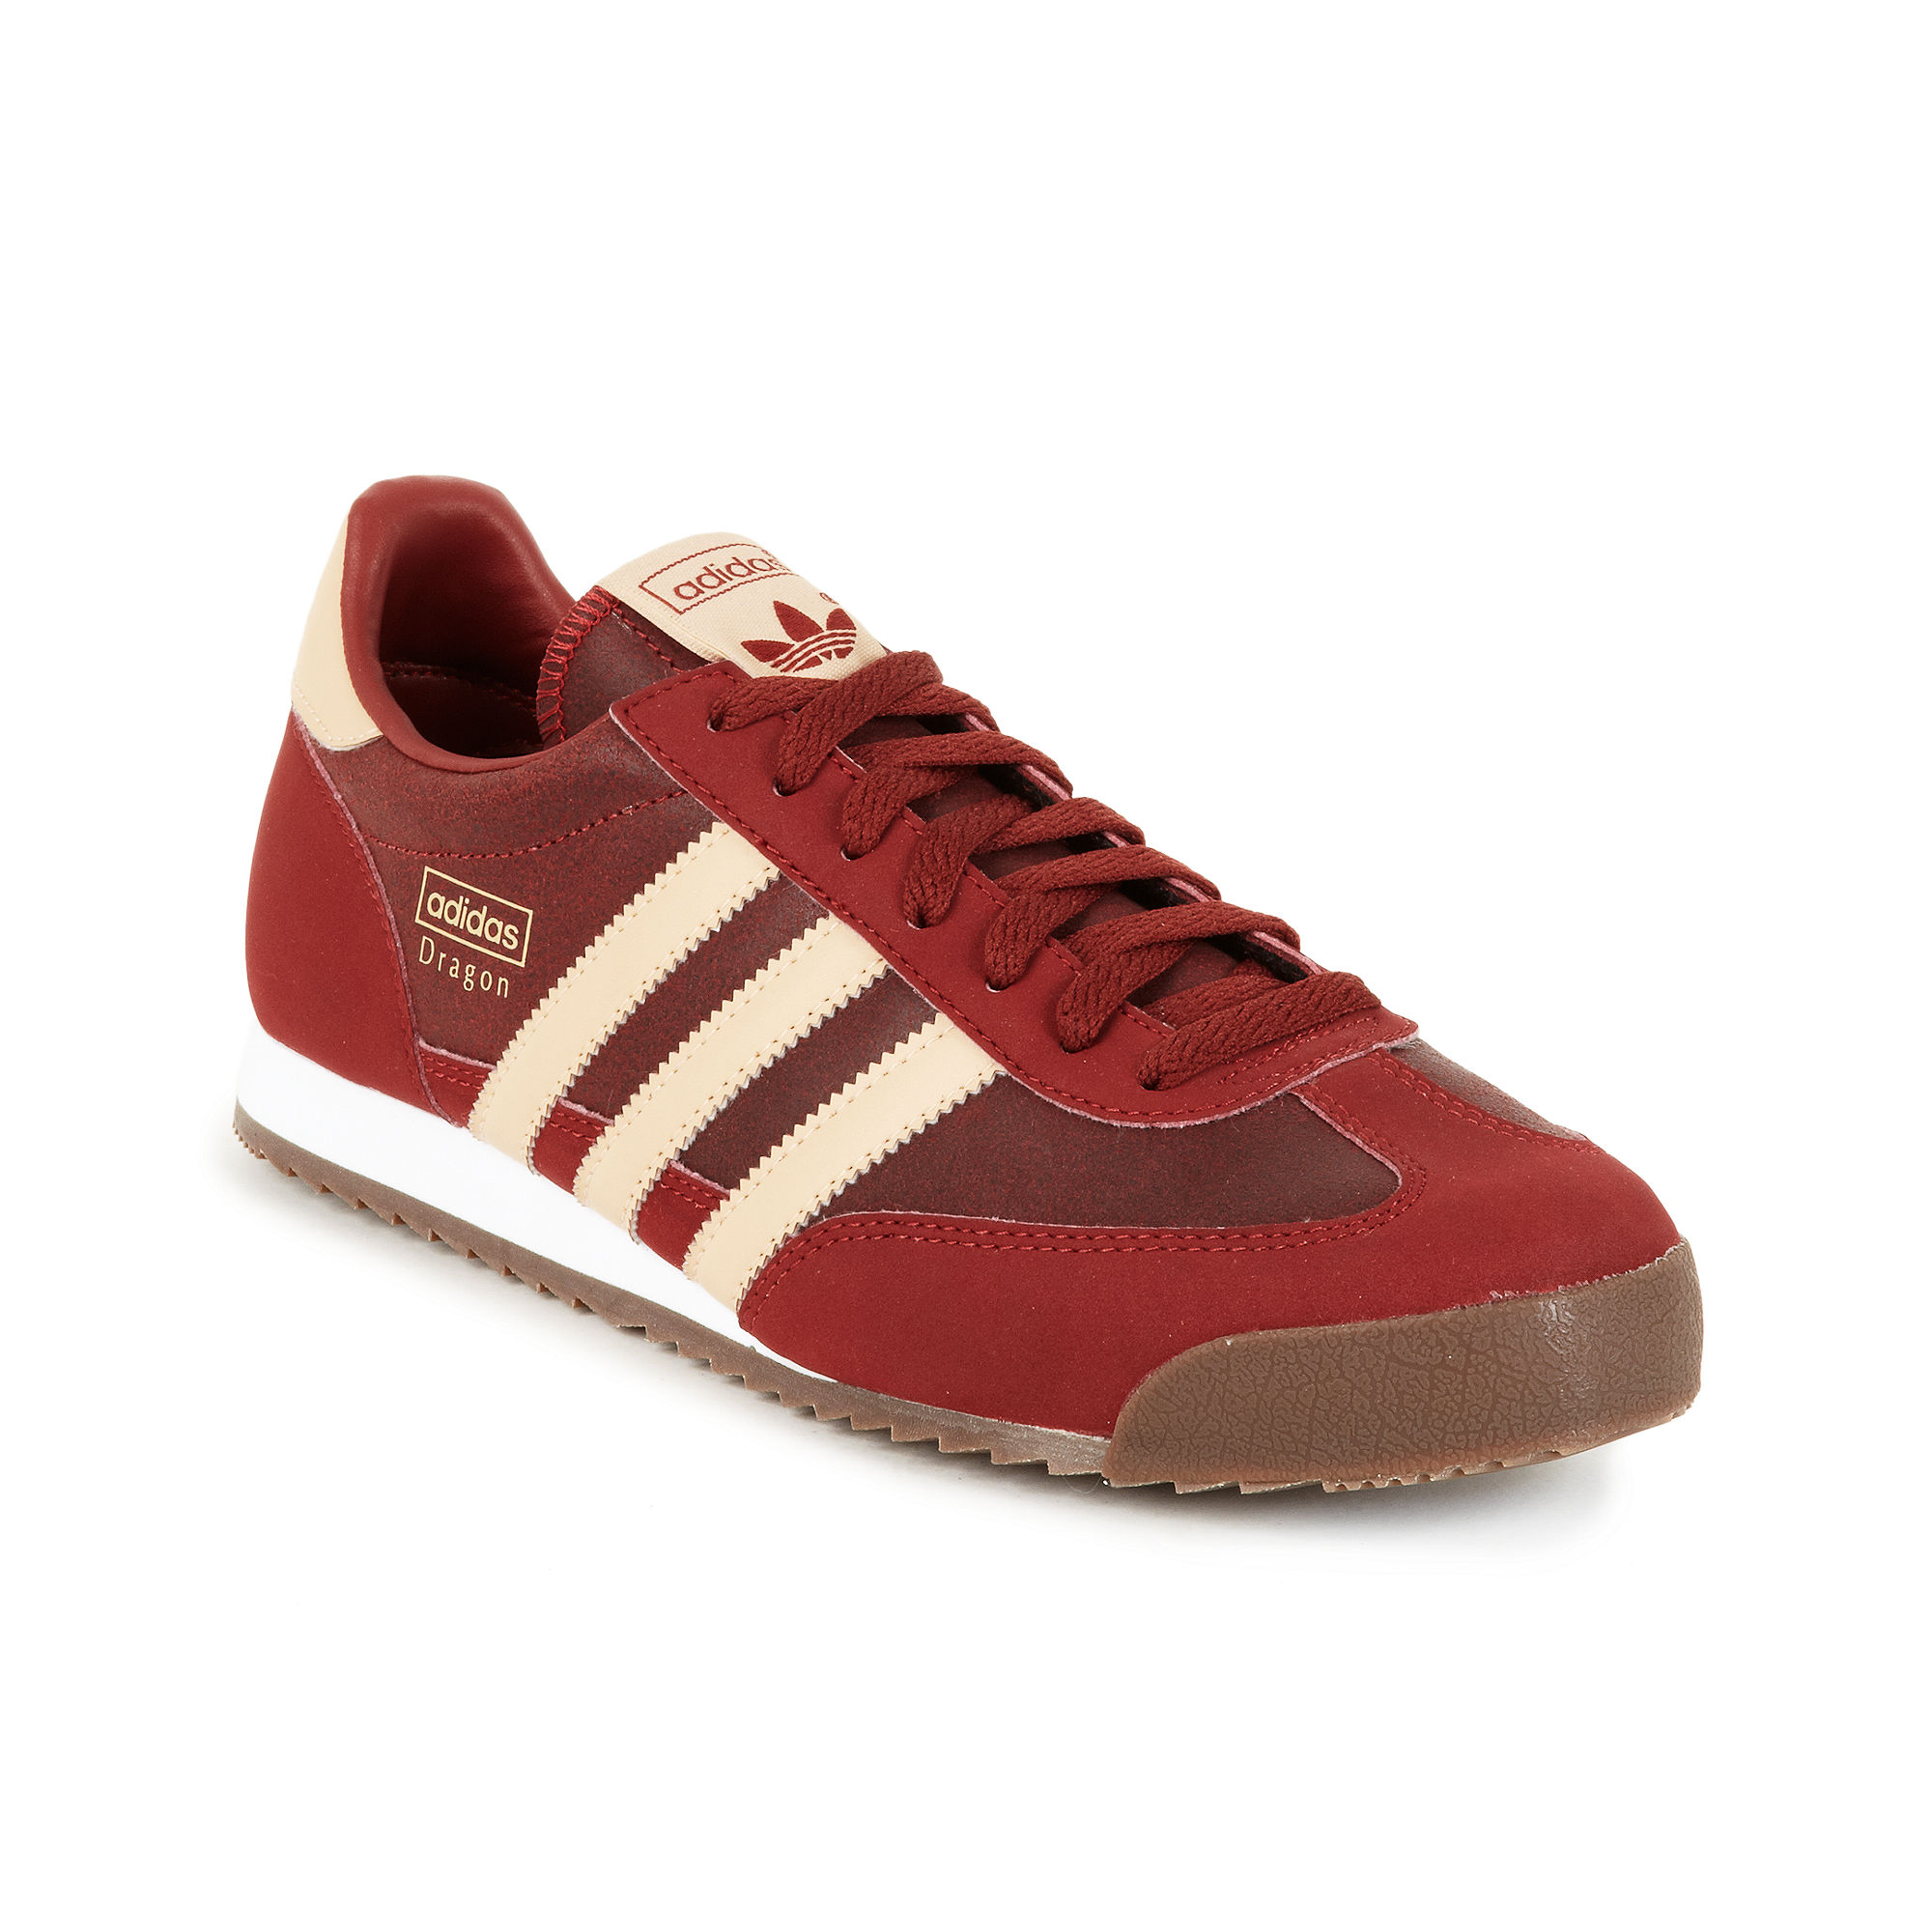 Lyst - Adidas Adidas Originals Dragon Sneakers in Red for Men